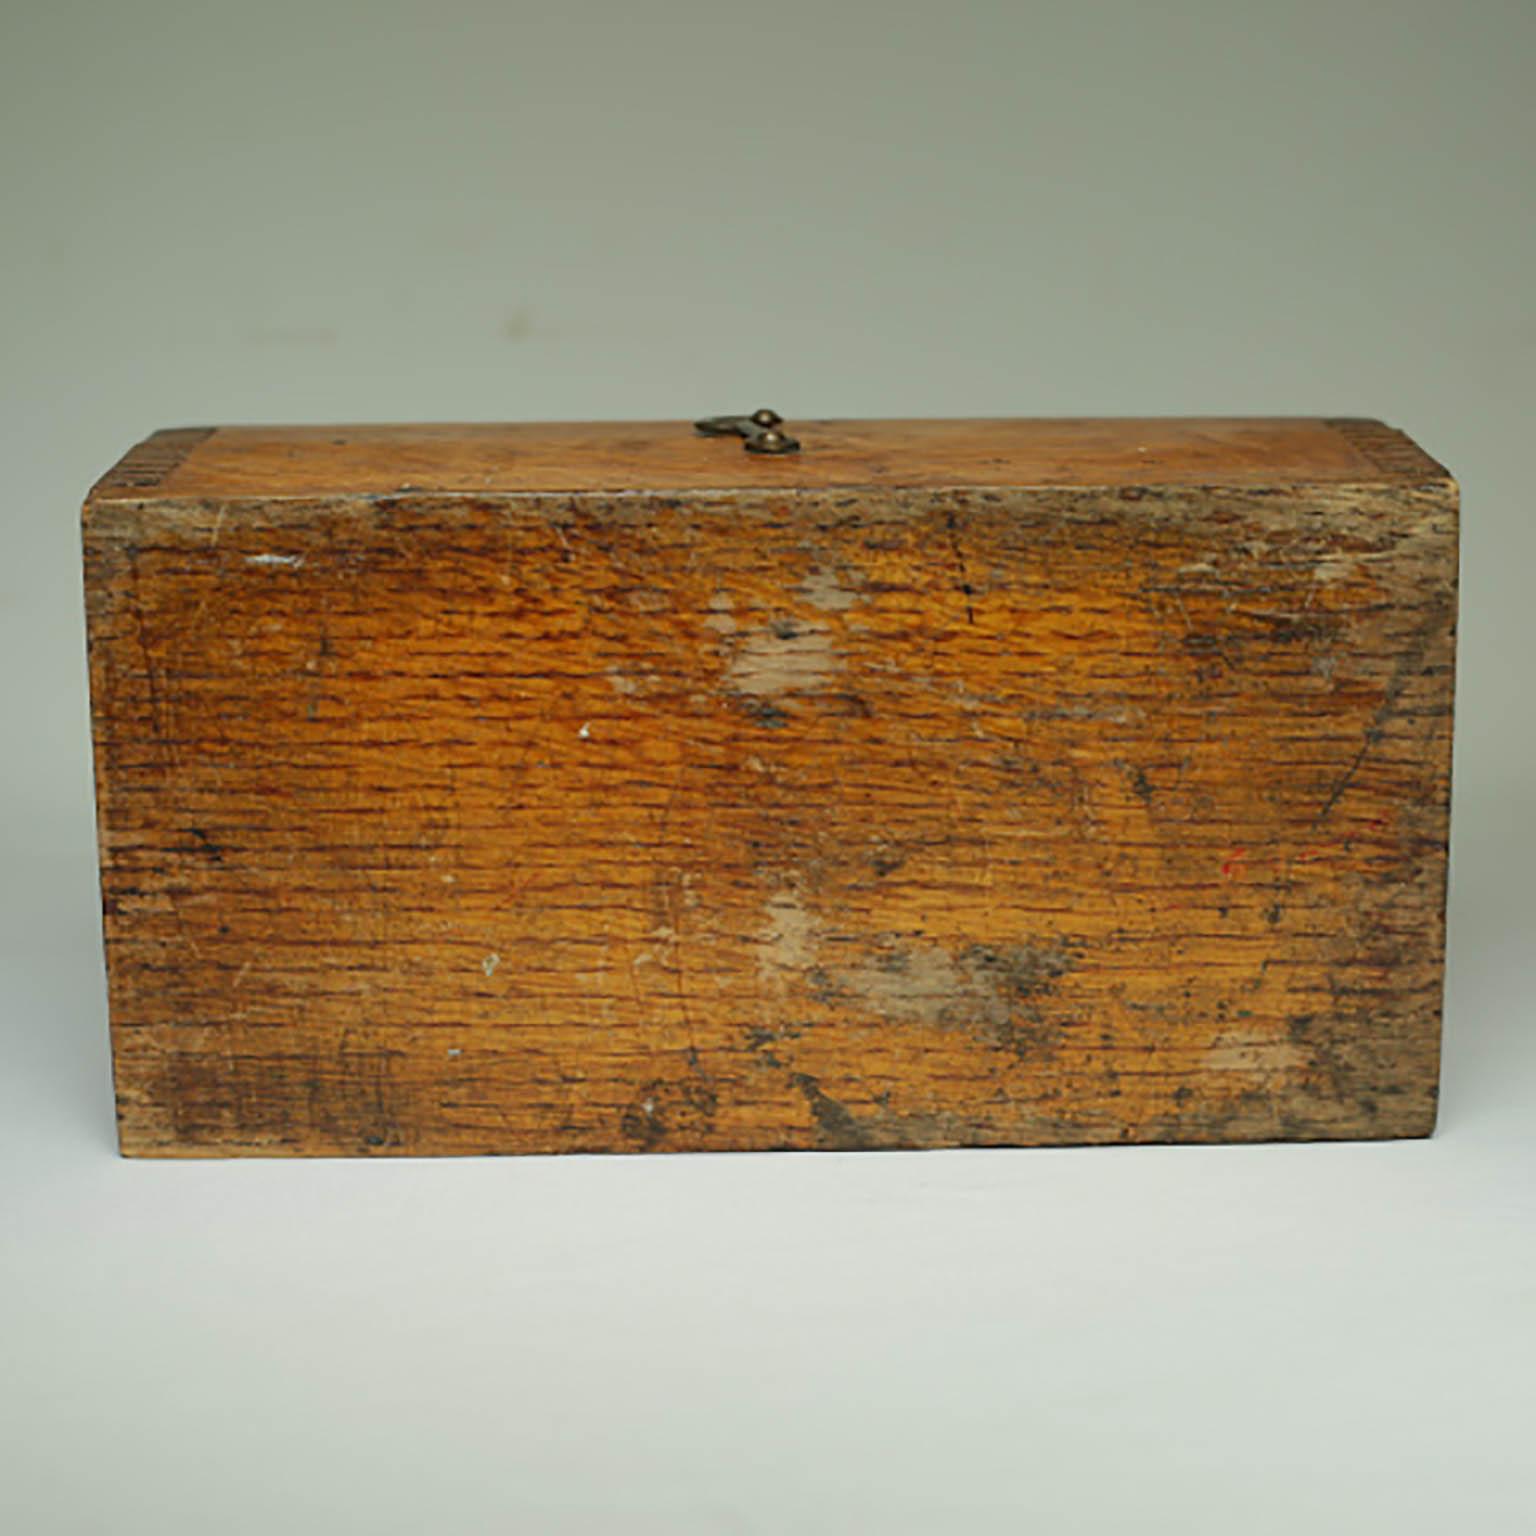 Vintage Wooden Box with Dovetails Joints, circa 1880s-1920s 3